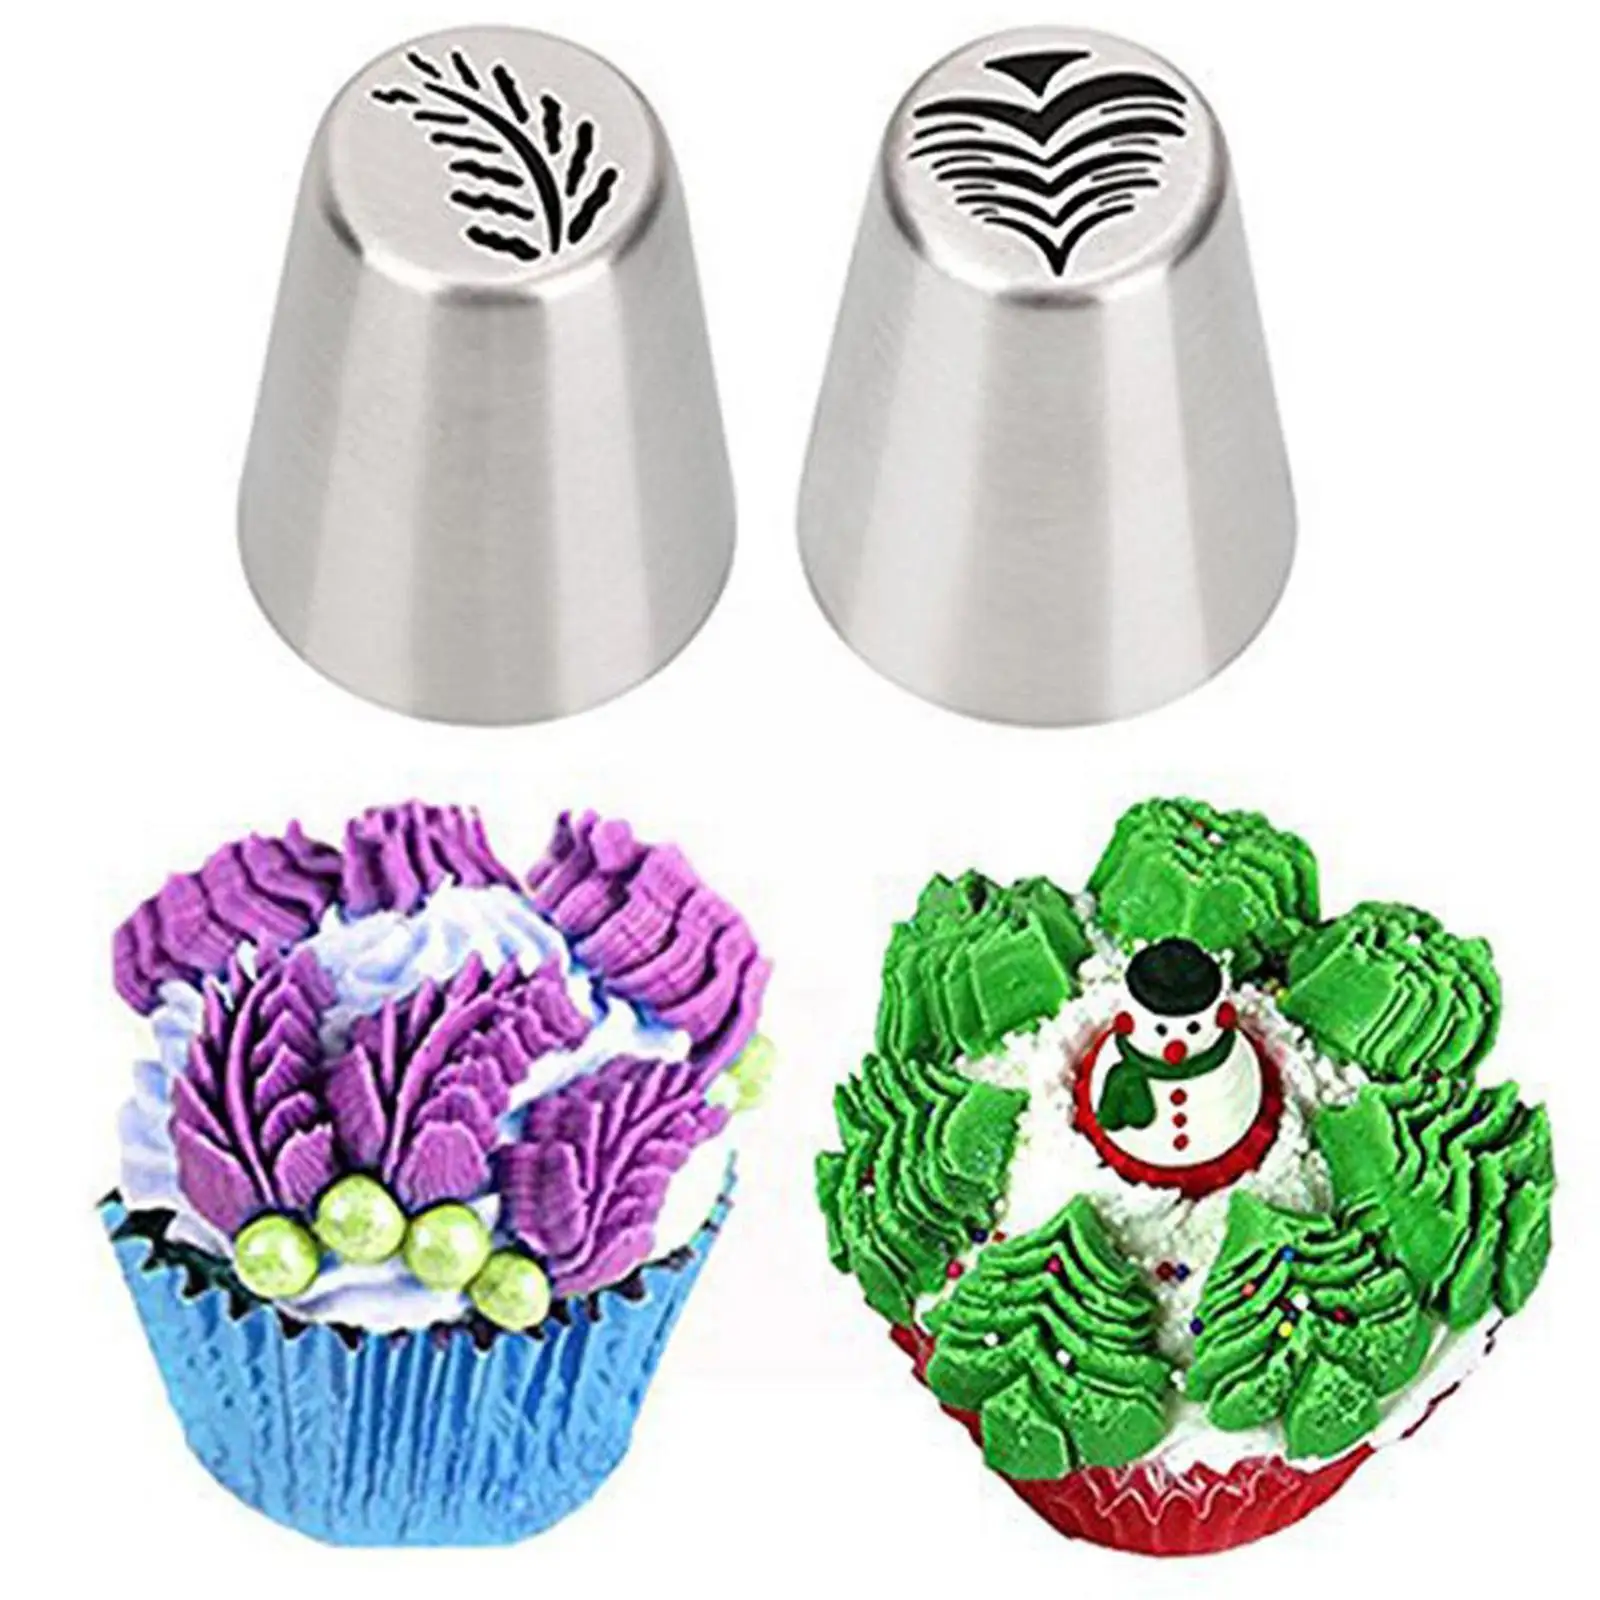 

Christmas Tree 2pcs Decoration Cake Piping Icing Tips Nozzles Pastry Russian Cookie Tools Cupcake Confectionery Baking F8p5